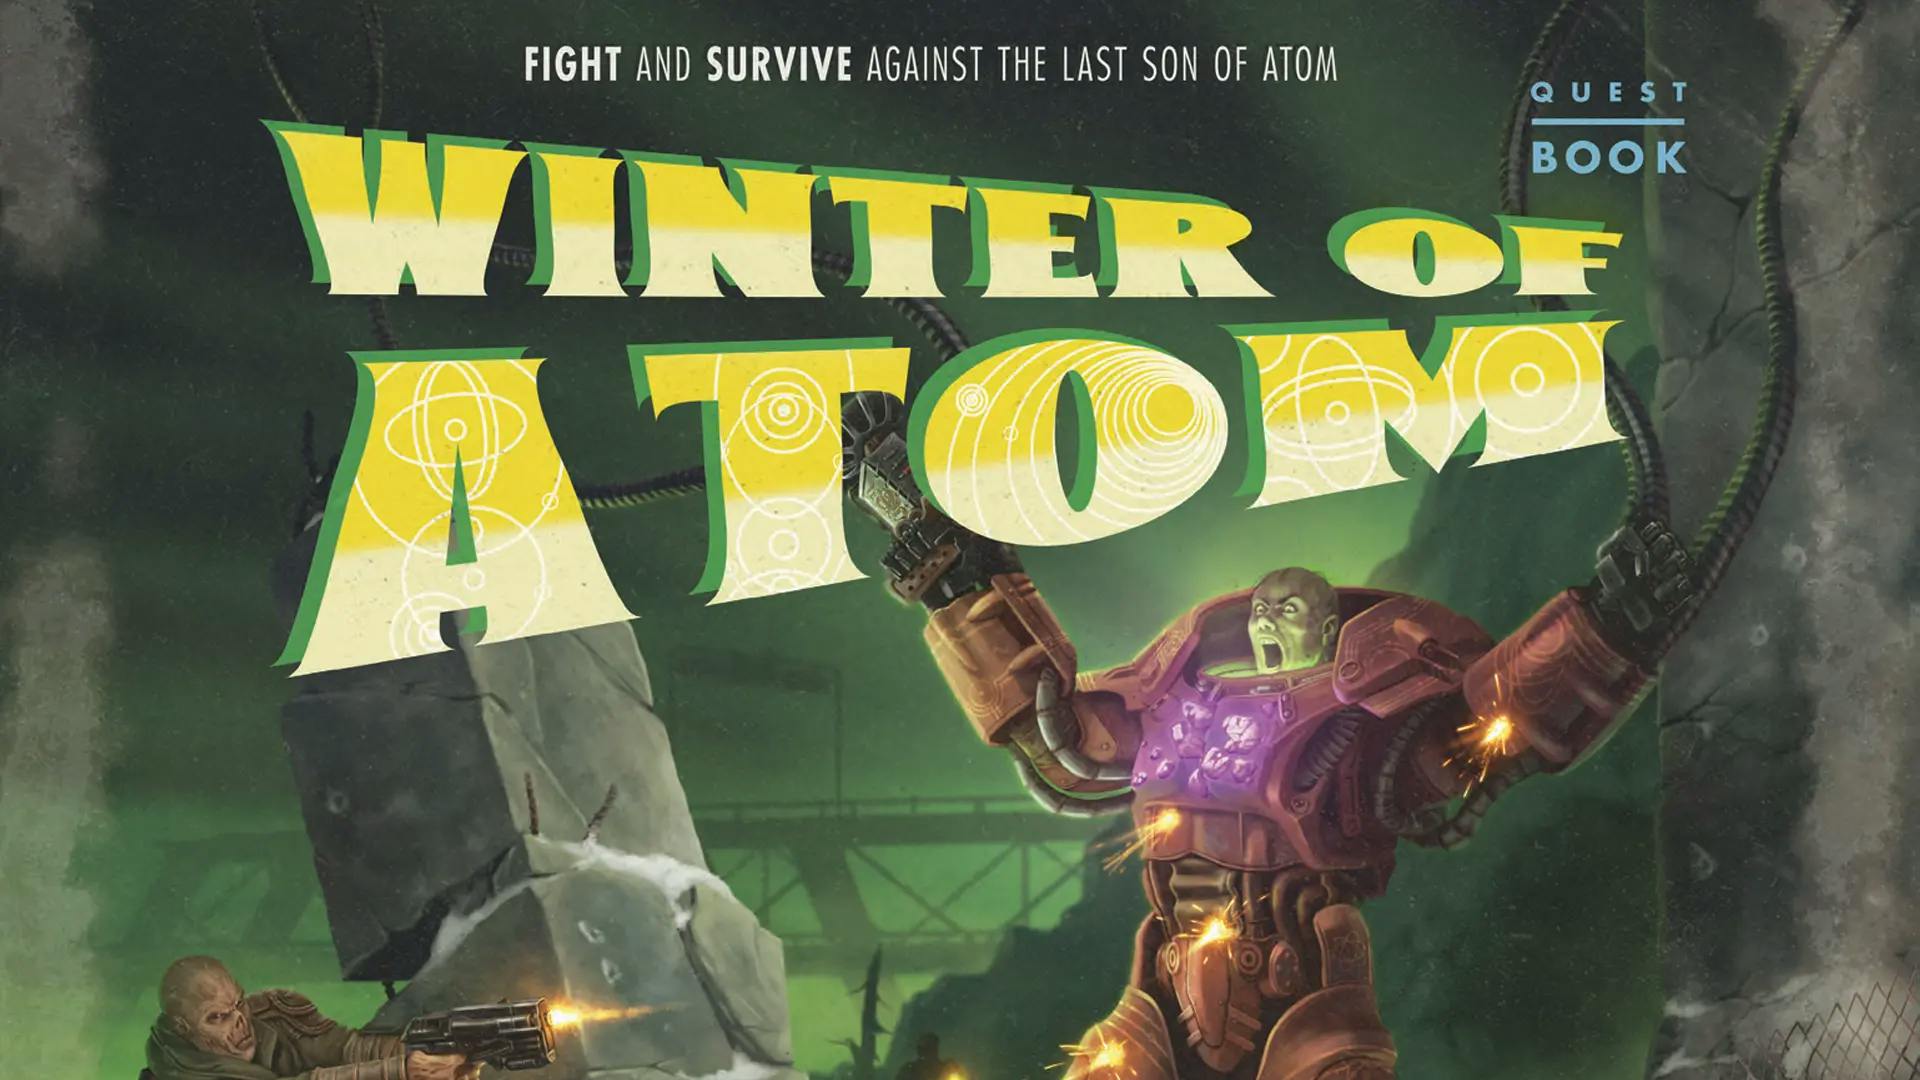 Fallout: Winter of Atom